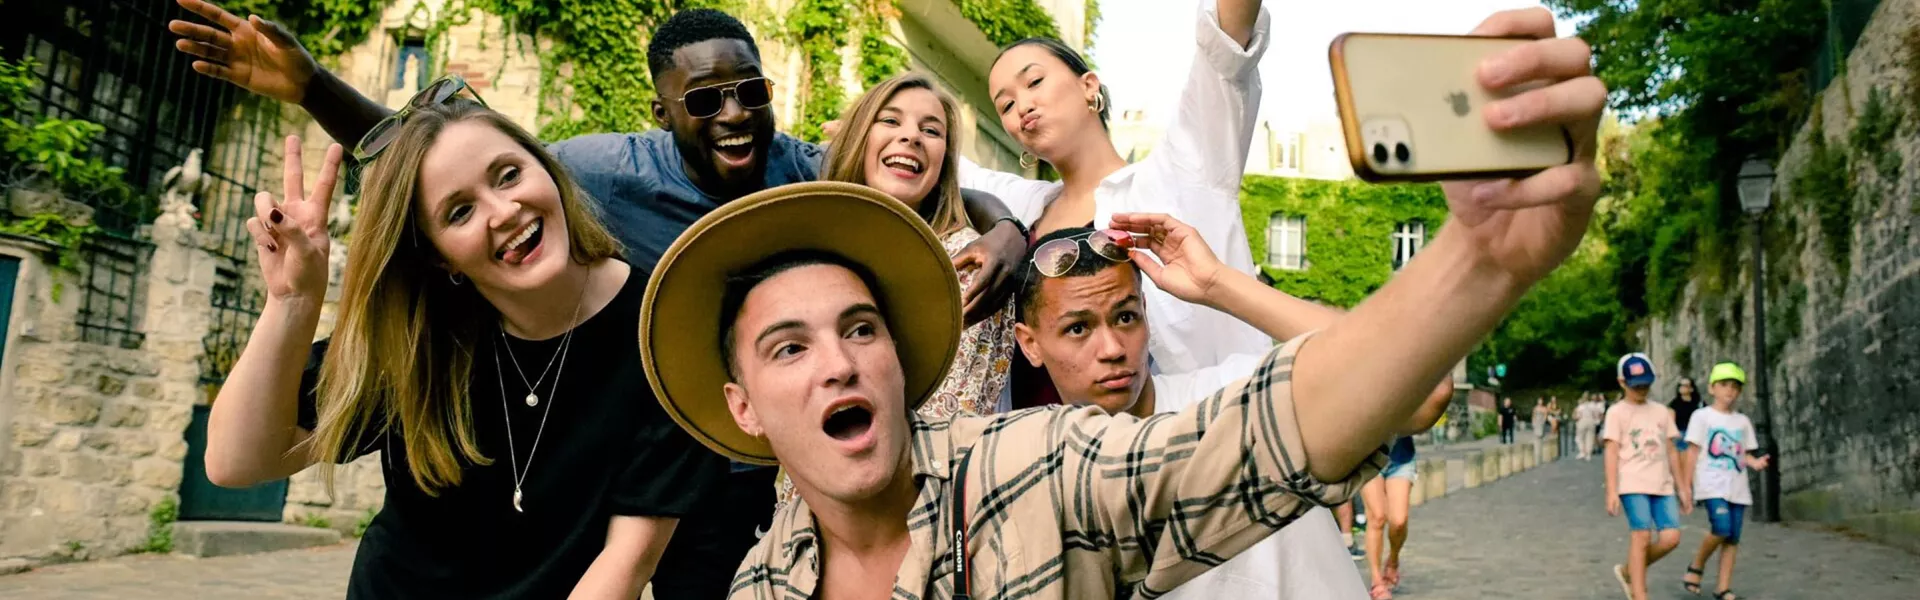 Group of young people taking a selfie in Paris